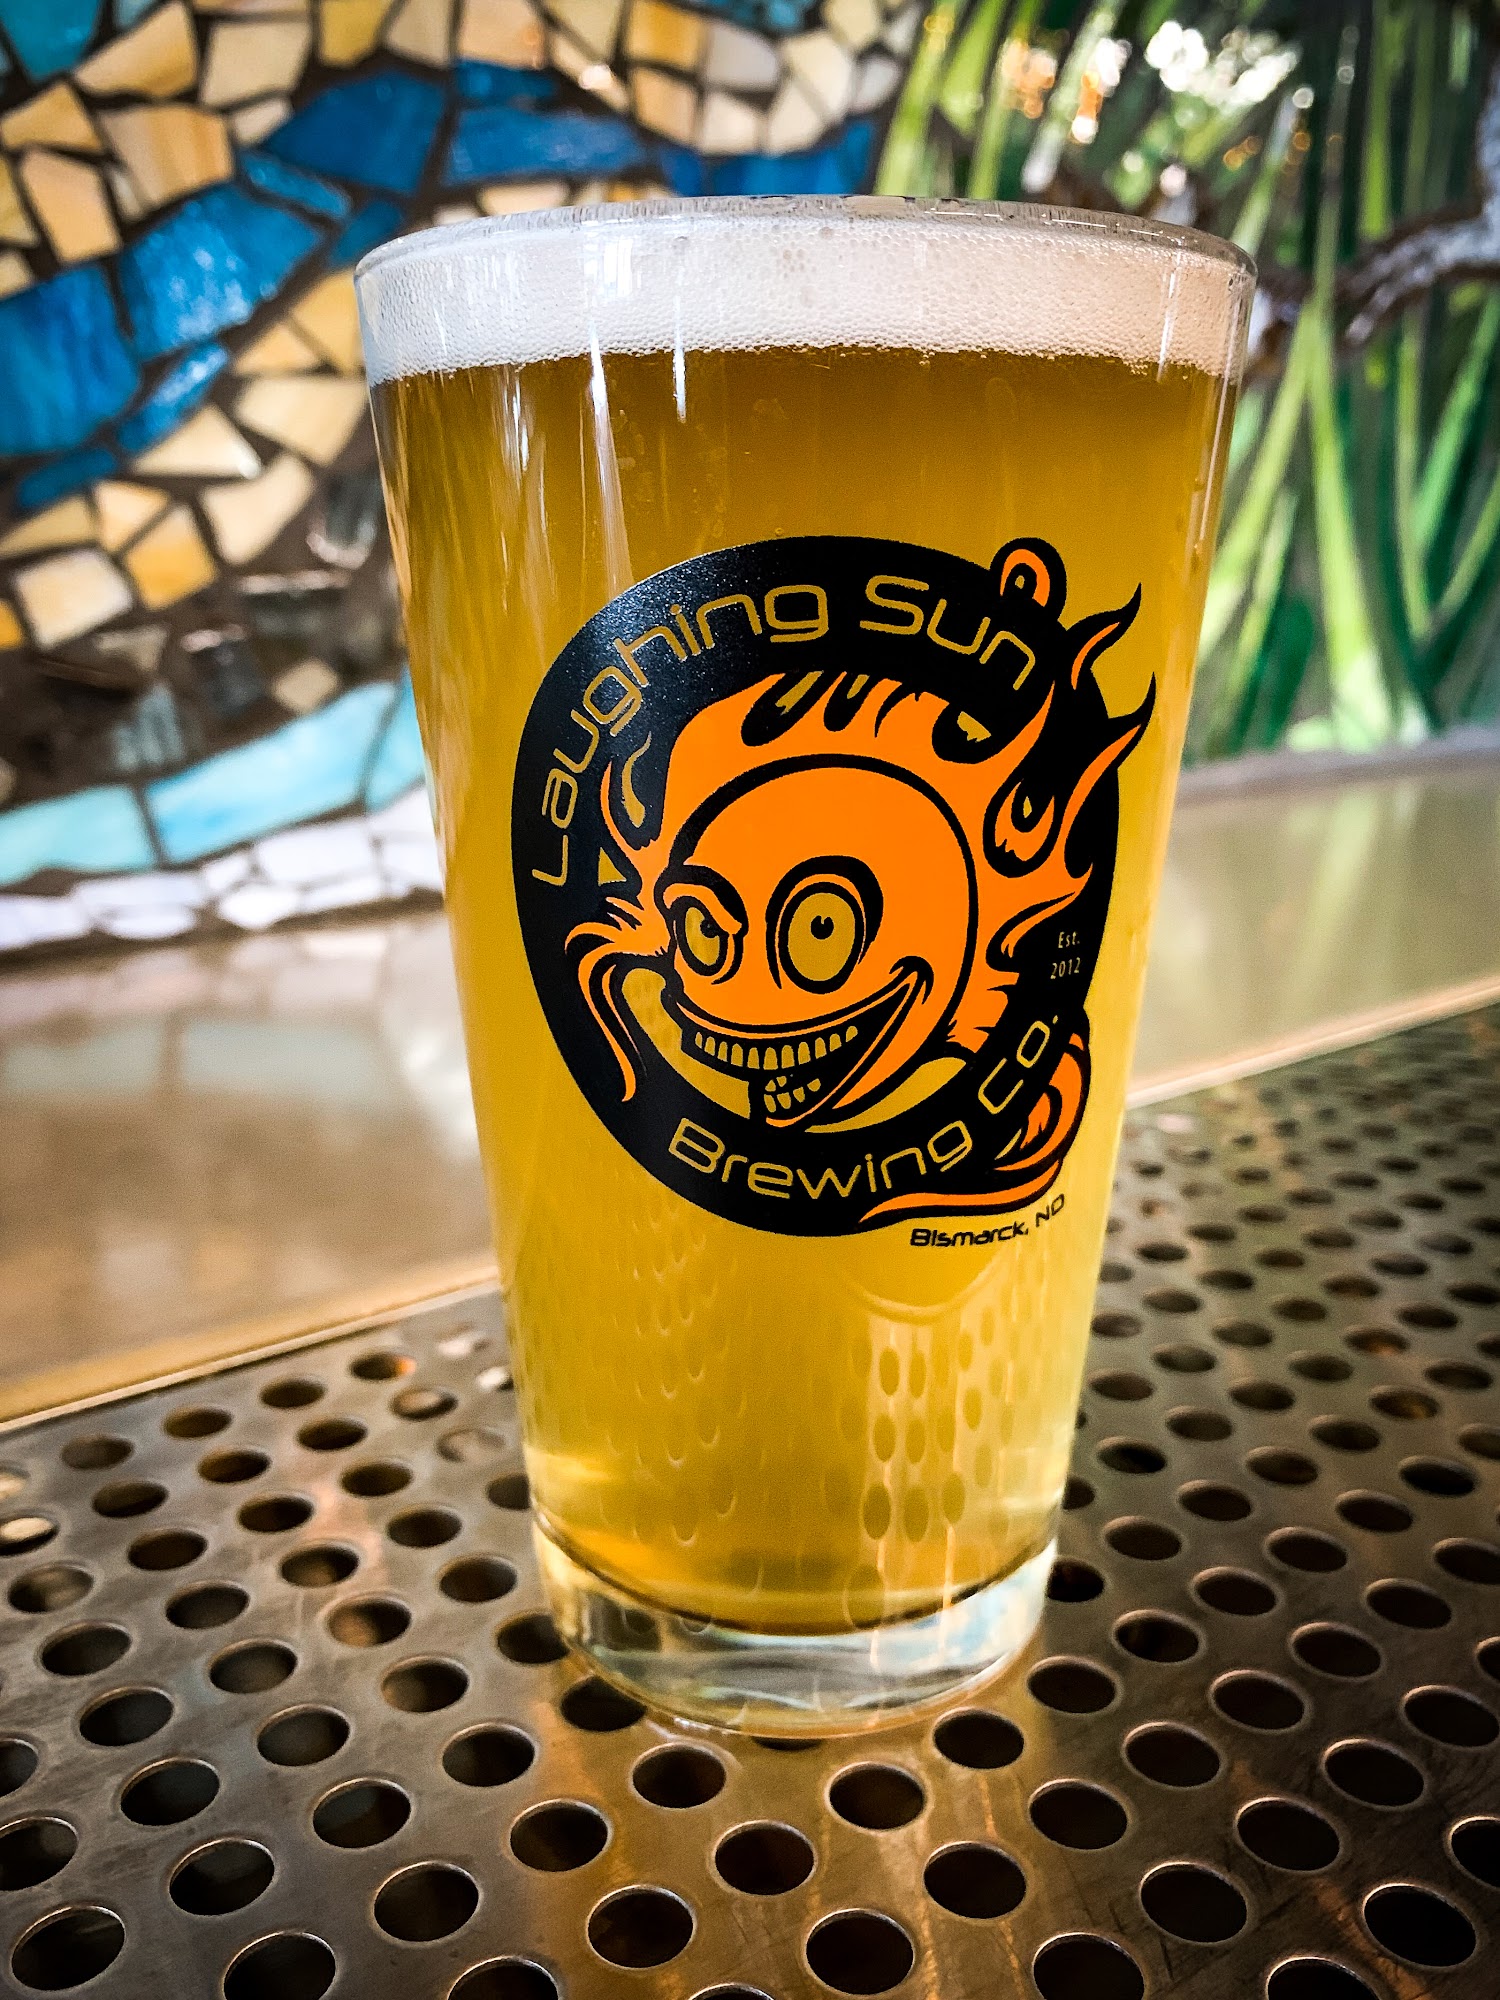 Laughing Sun Brewing Co.